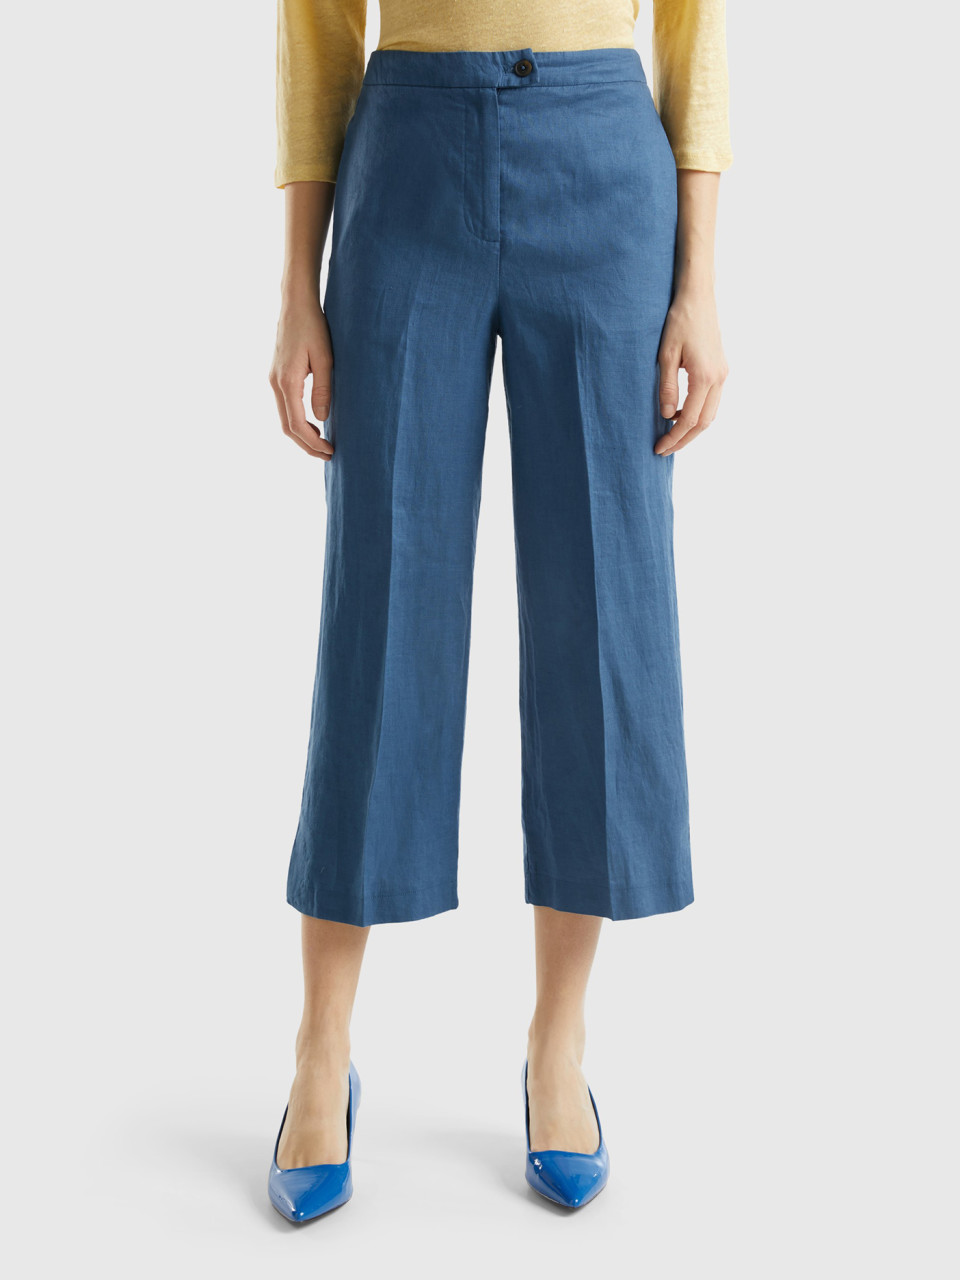 Benetton, Cropped Trousers In Pure Linen, Air Force Blue, Women